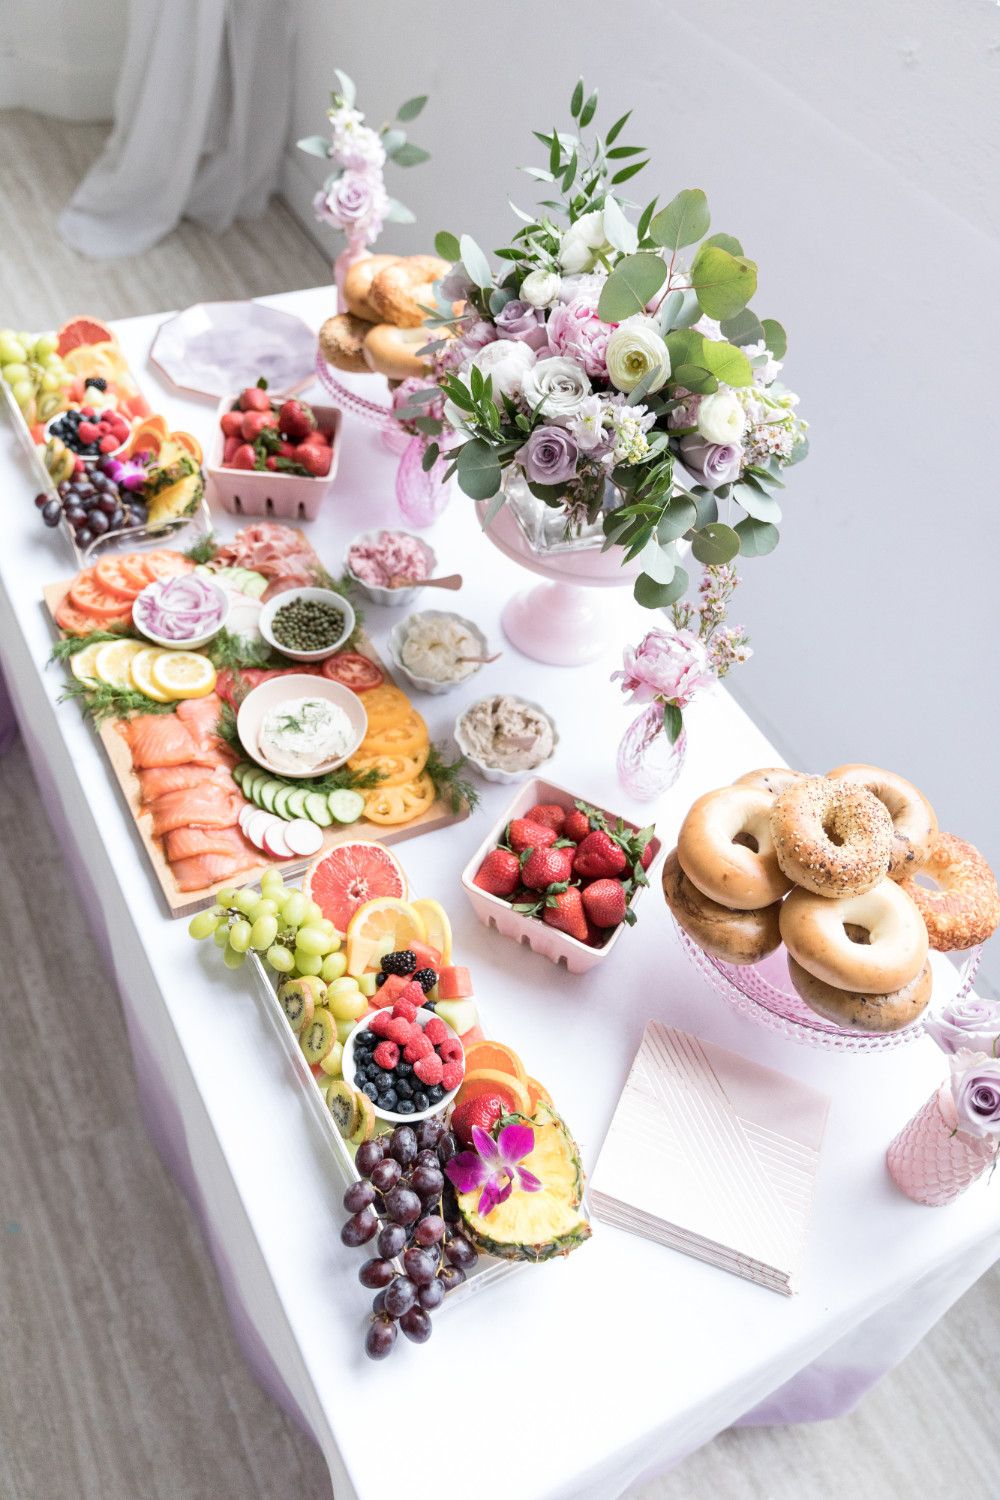 How To Host One Epic Galentine’s Day Brunch - Brunch Table Bar Set Up